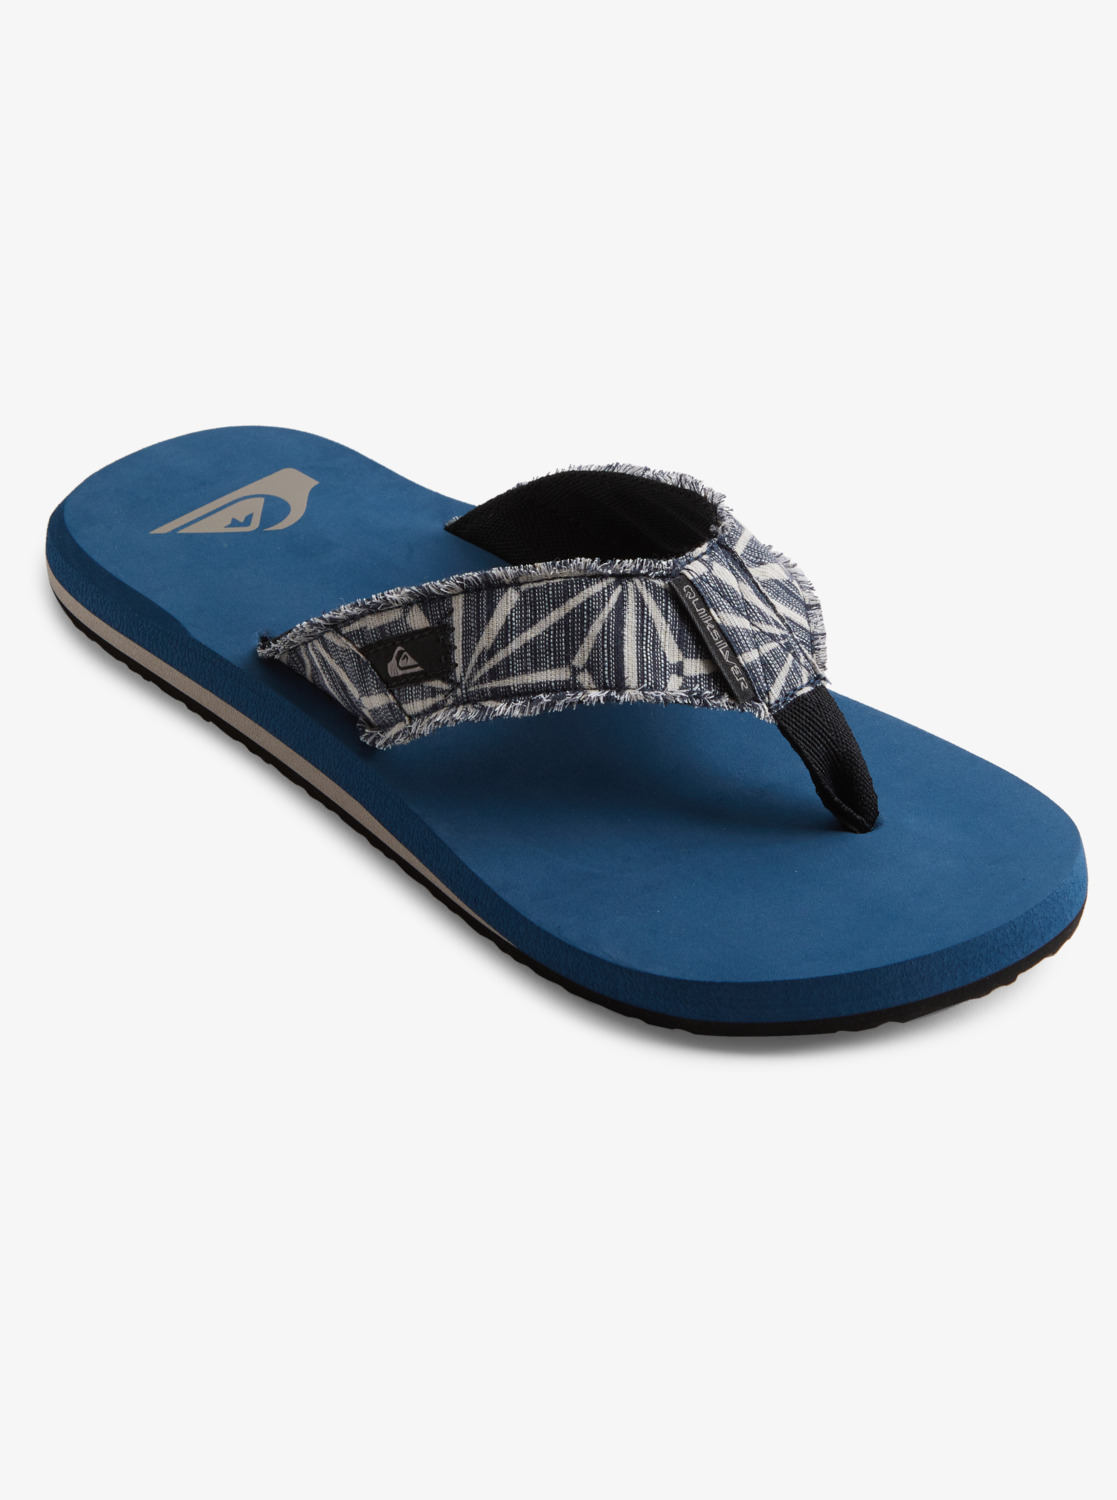 Quiksilver pantofle Monkey Abyss blue Velikost: 44